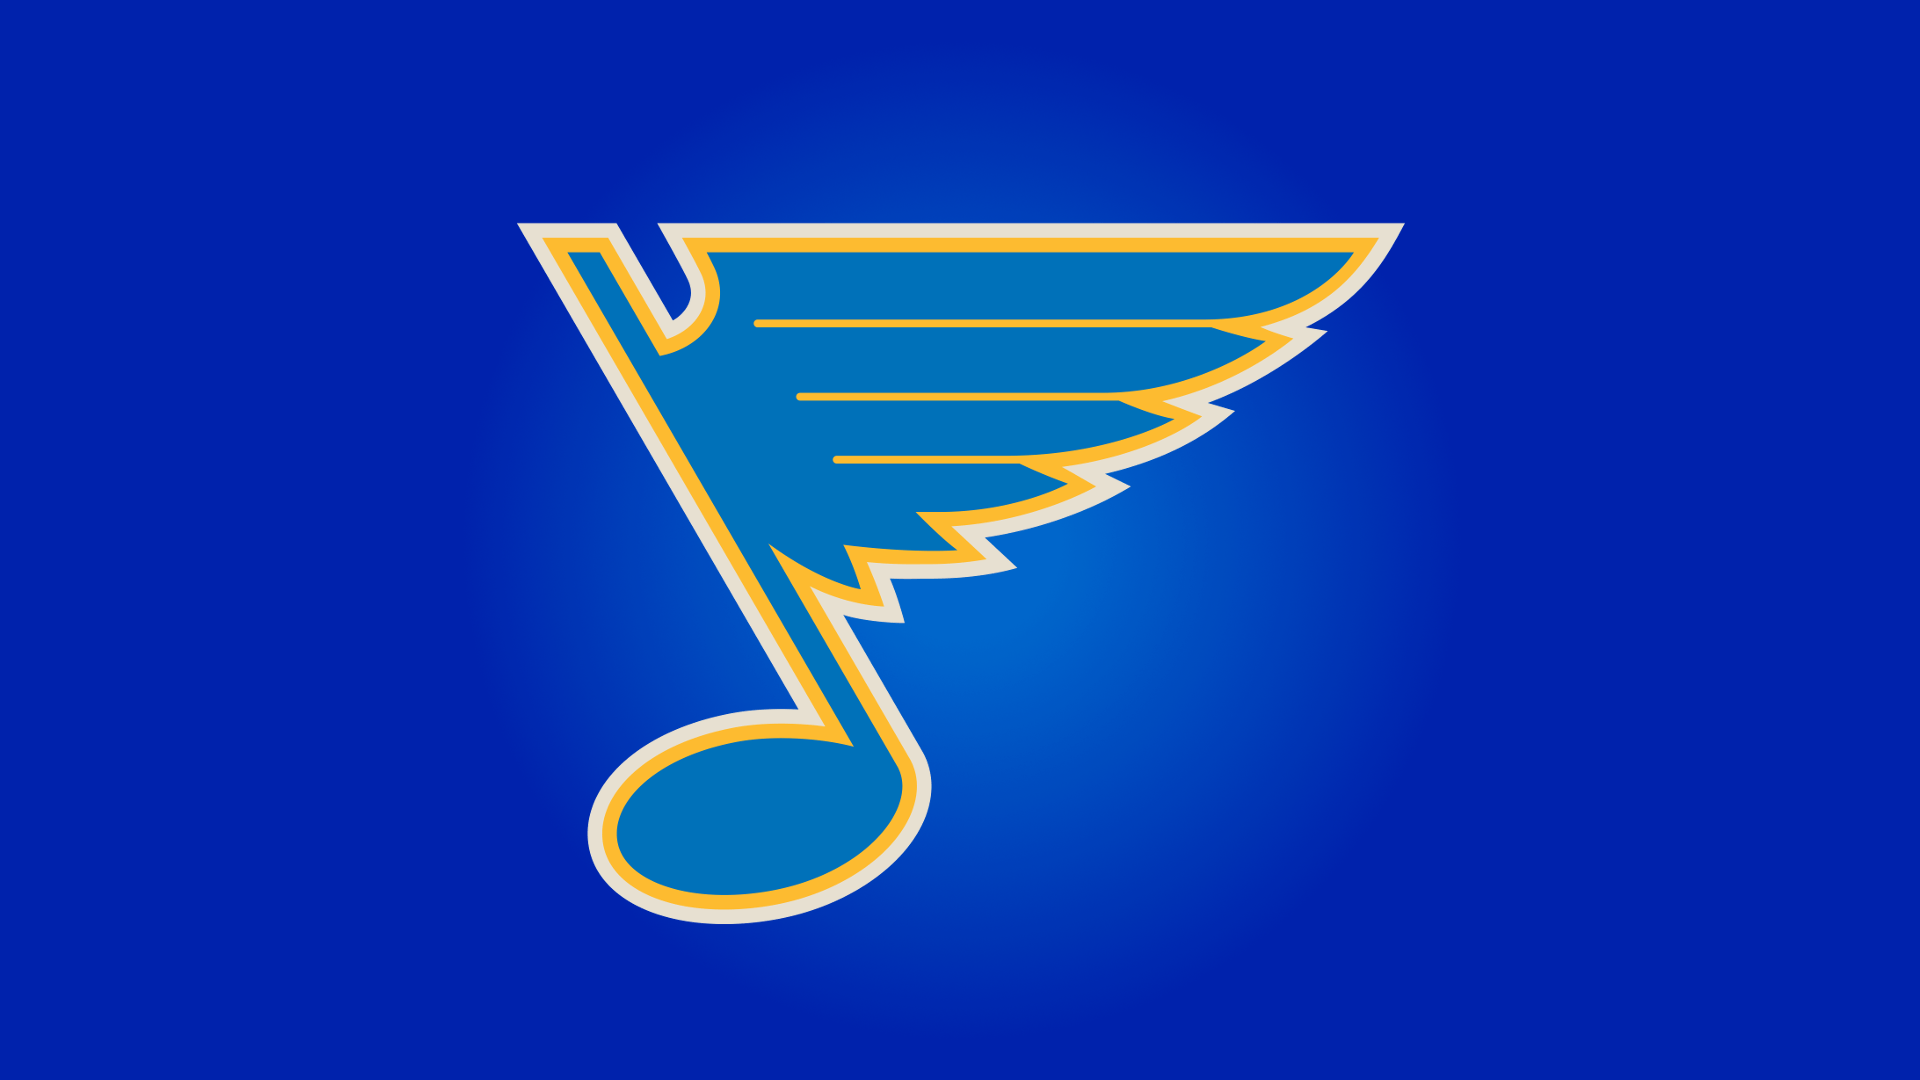 Made a simple Winter Classic wallpaper for you guys! 1080p, PNG